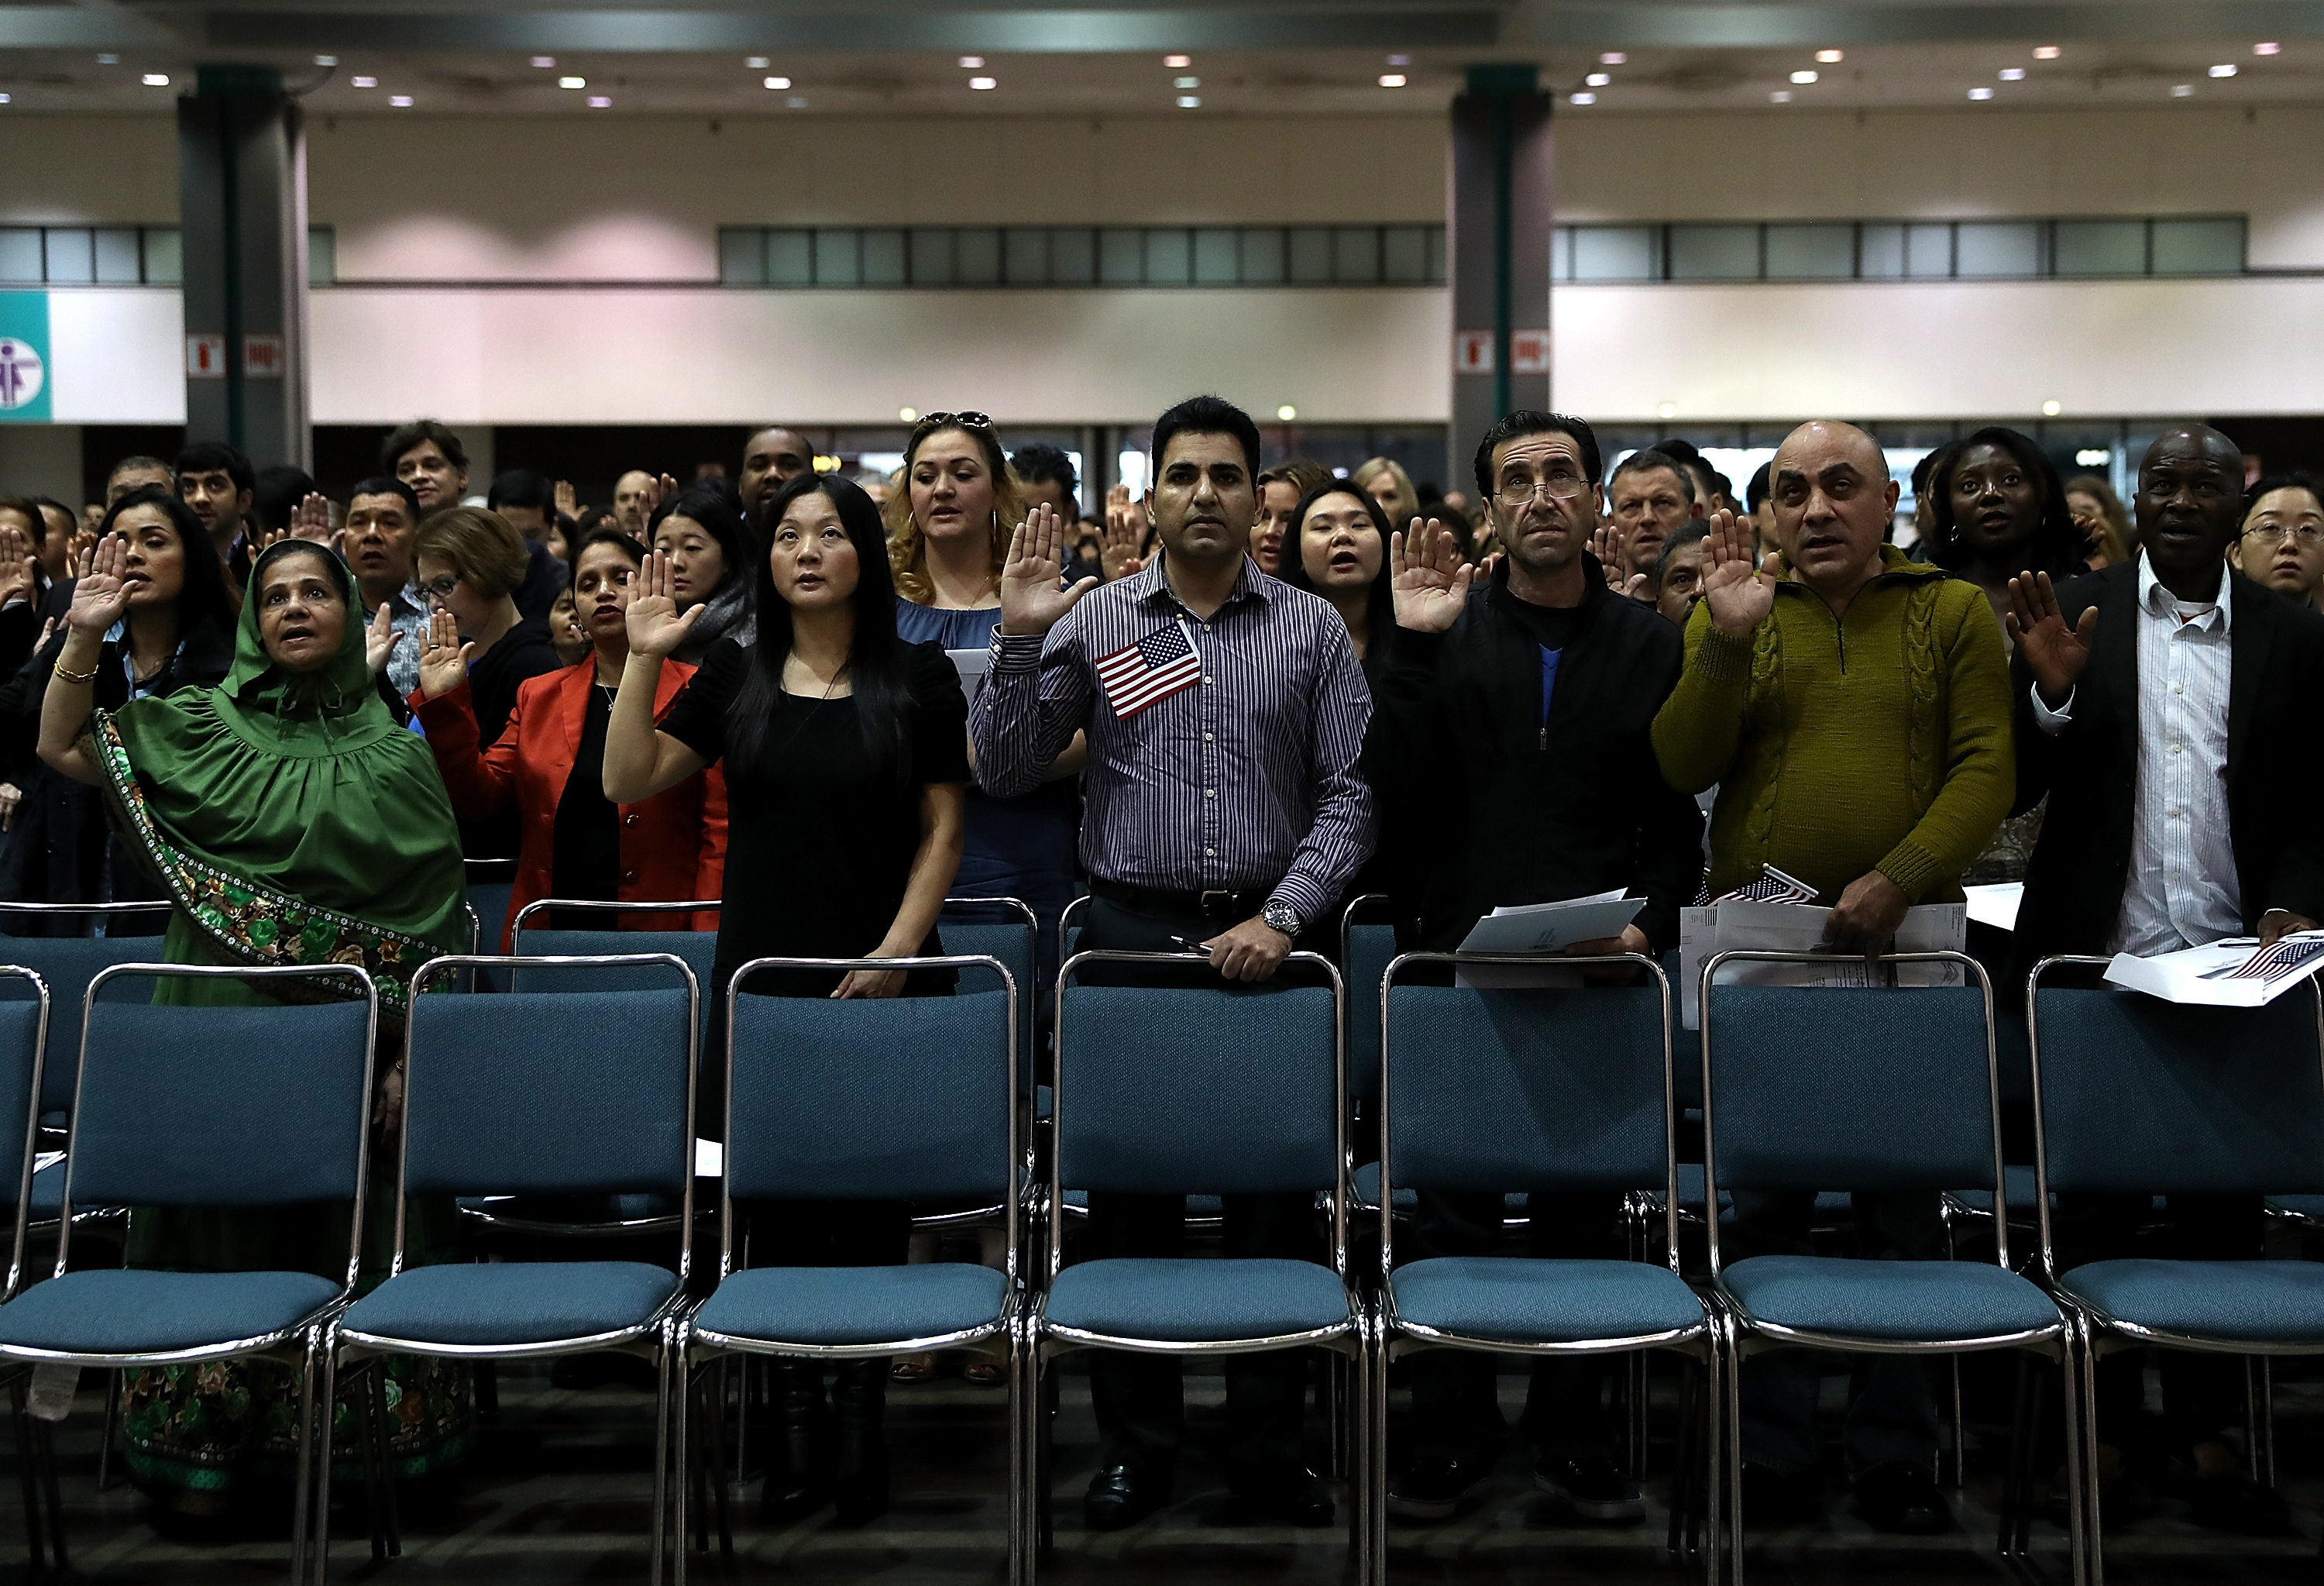 Immigrants Are Sworn In As U.S. Citizens In Naturalization Ceremony At L.A. Convention Center